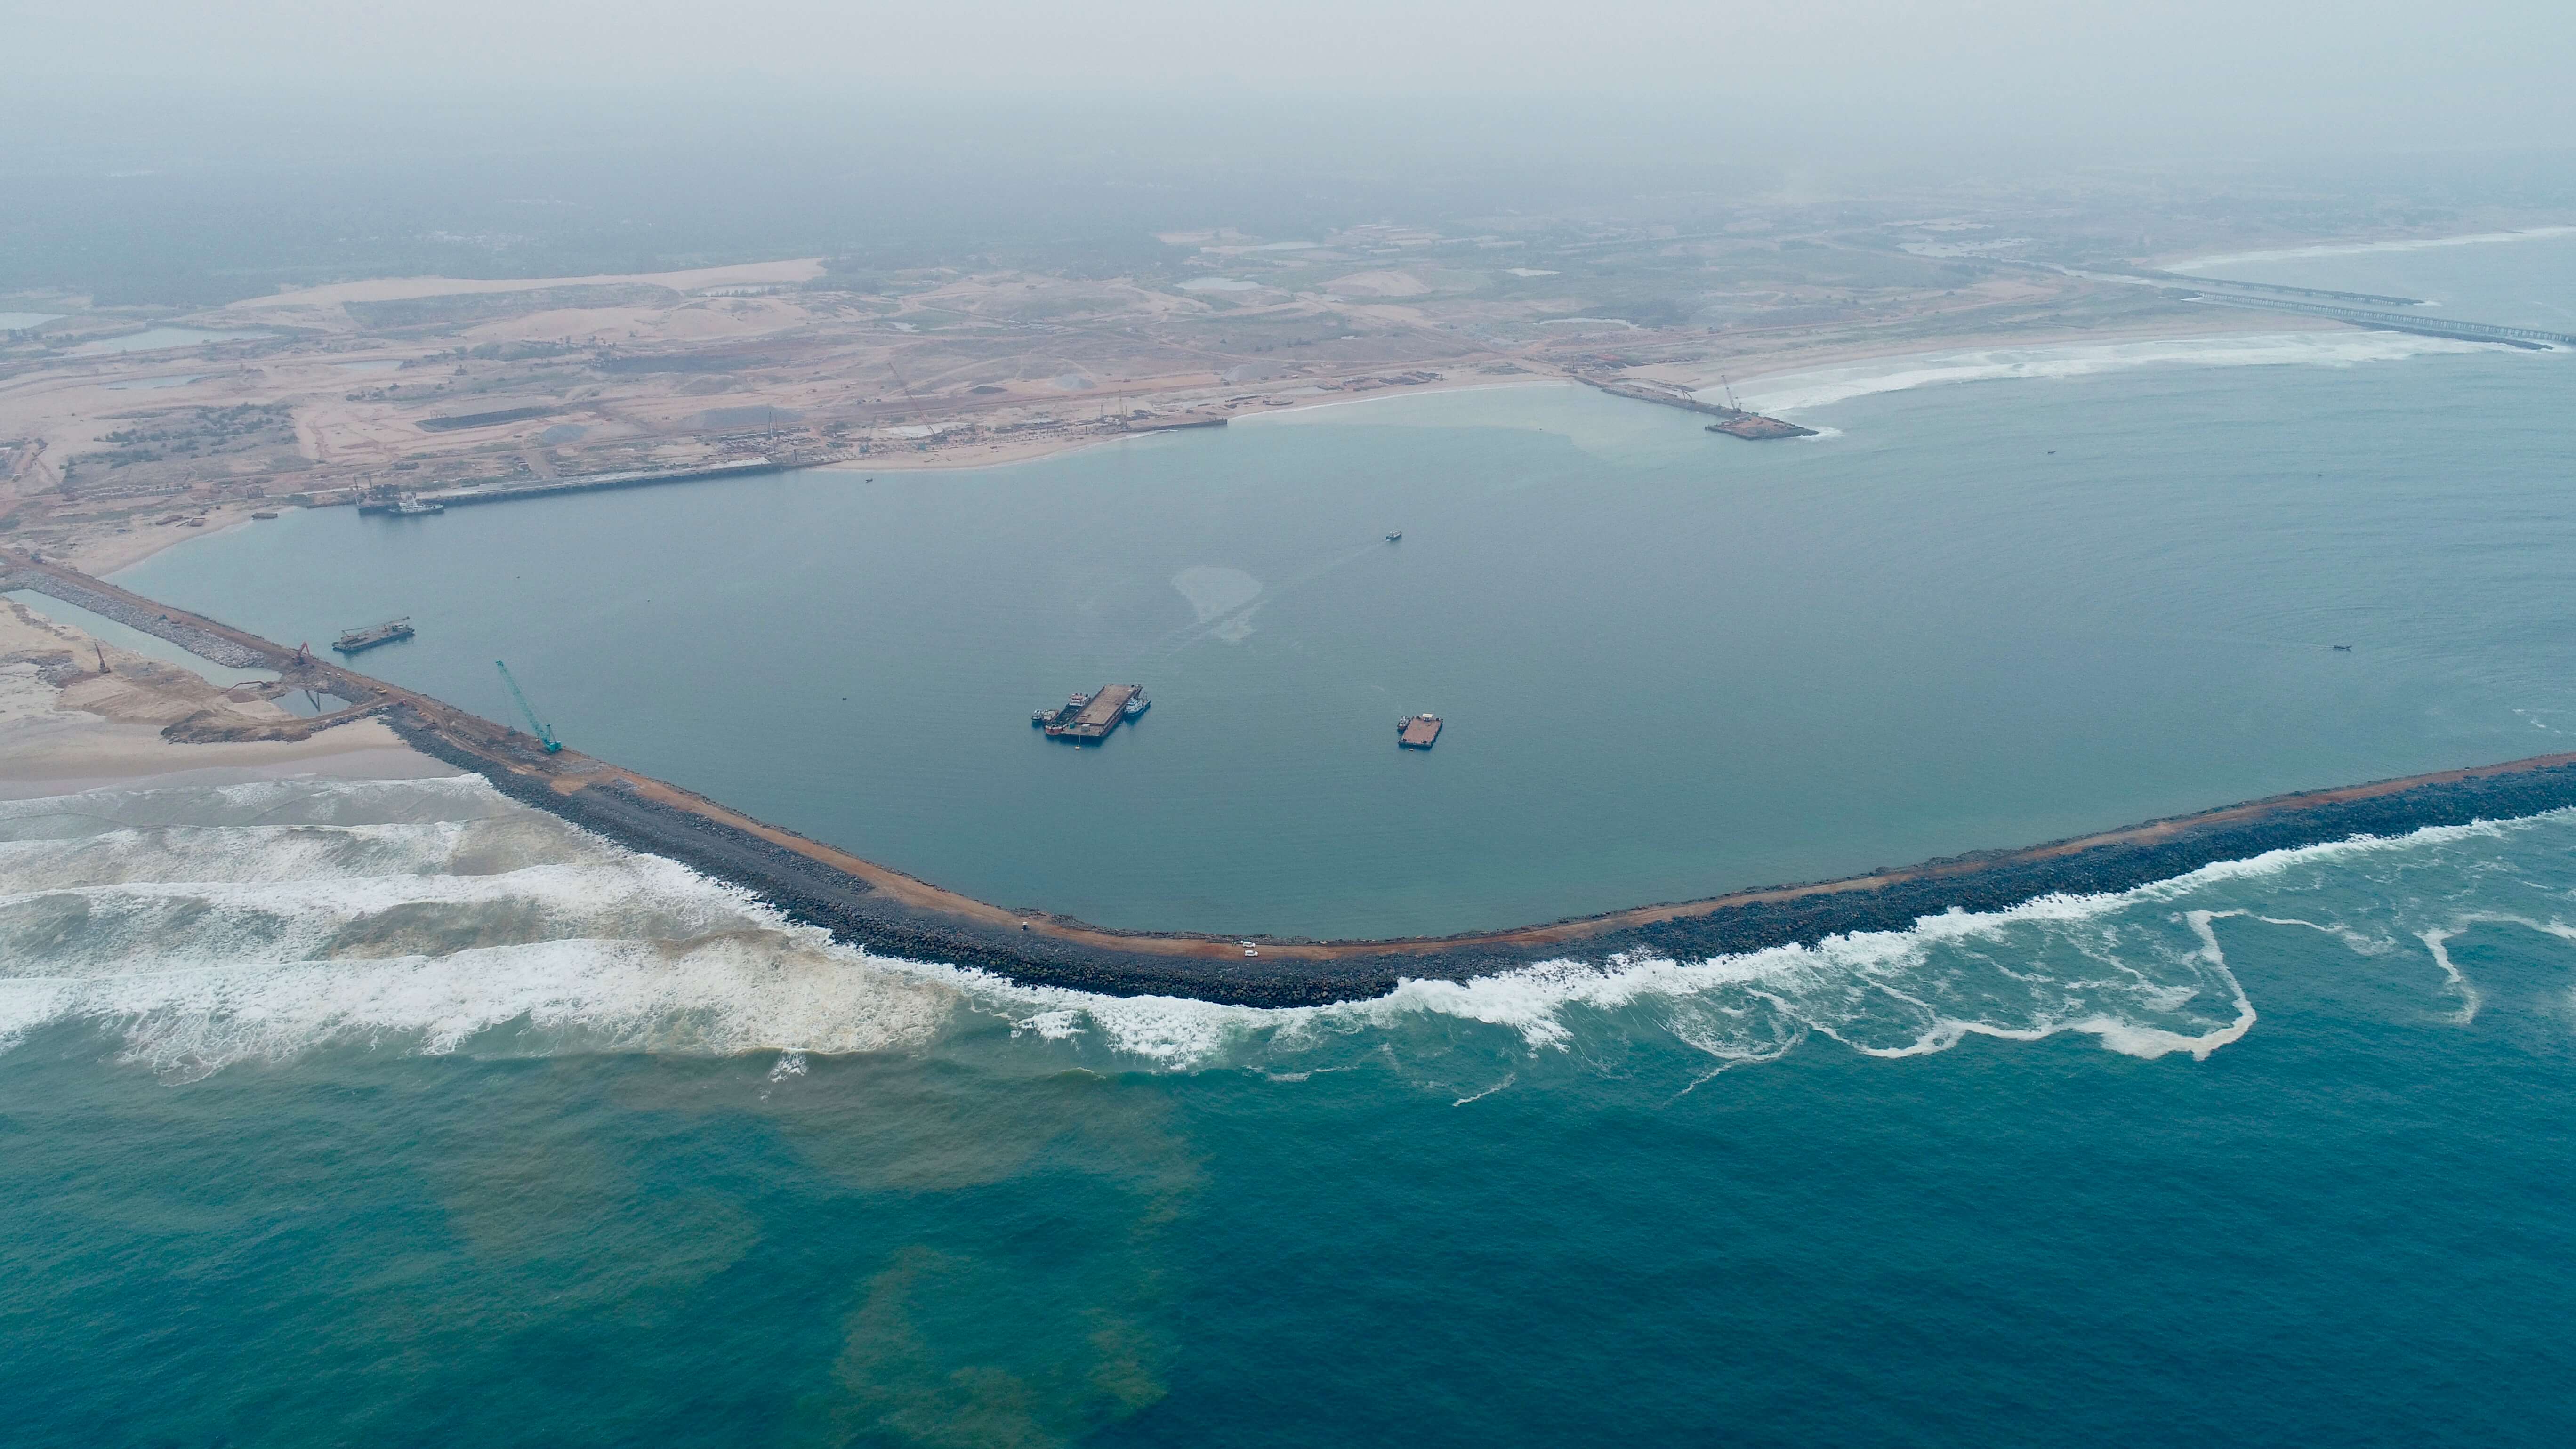 Gopalpur Port shares its boundaries with Paradip Port in north and Vishakahapatnam in the south, giving it access to large scale steel, power and cement industries